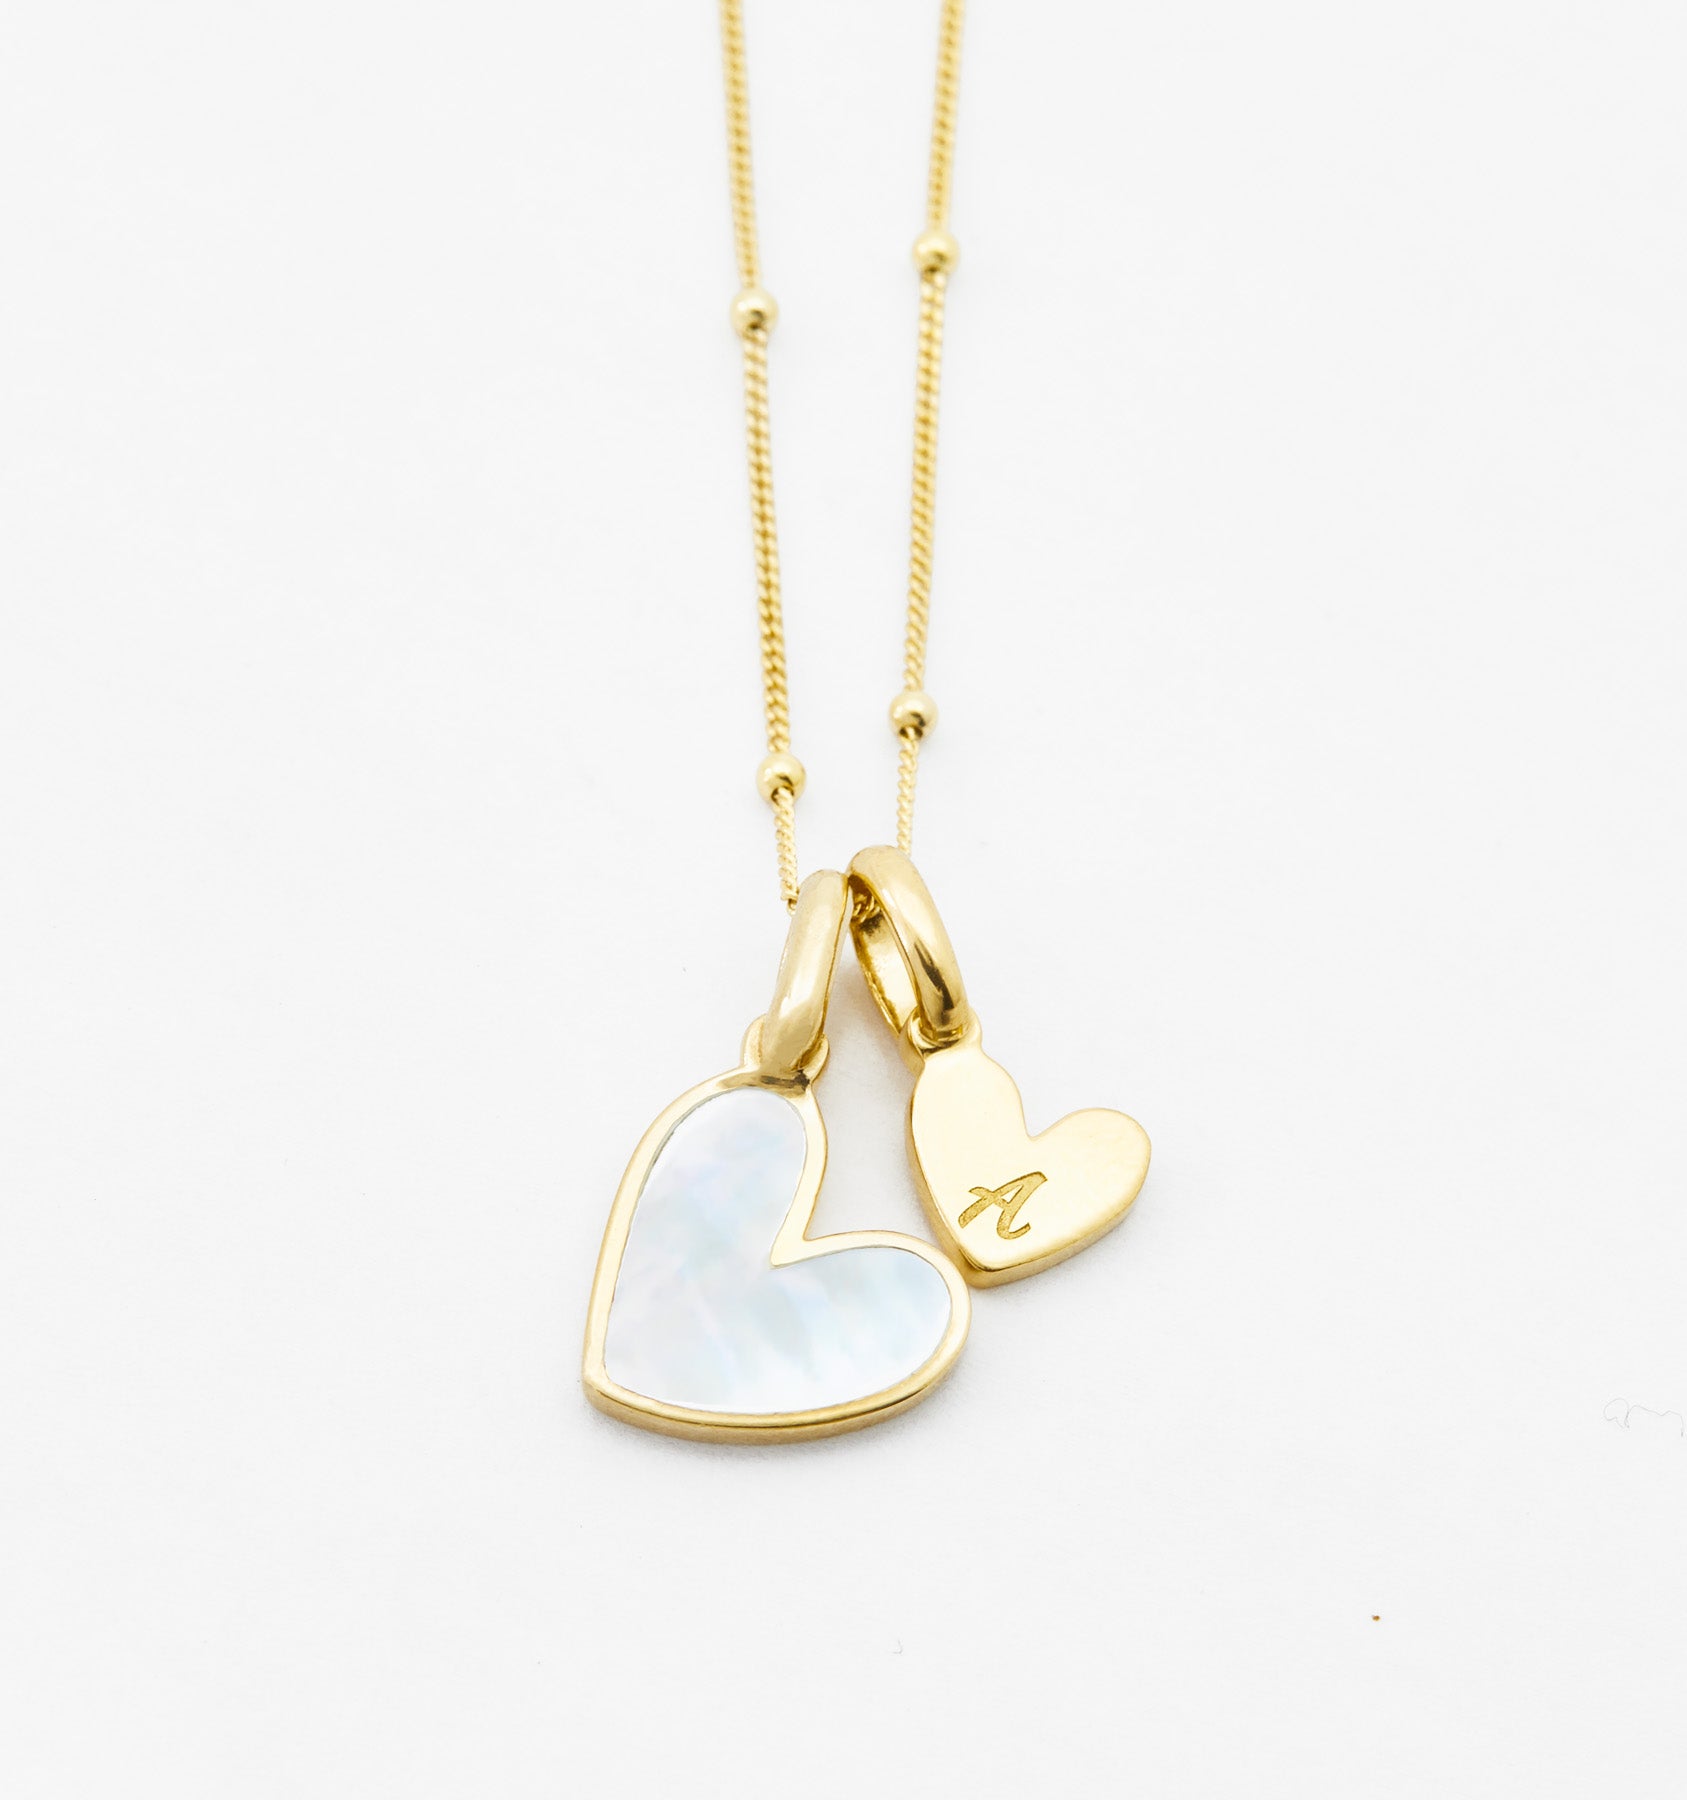 Original 18k Saudi Gold Jewelry Sets Pawnable Necklace Women's Heart-shaped  Letters Love Mama Pendant Earrings Two Set of Mother's Day Gifts